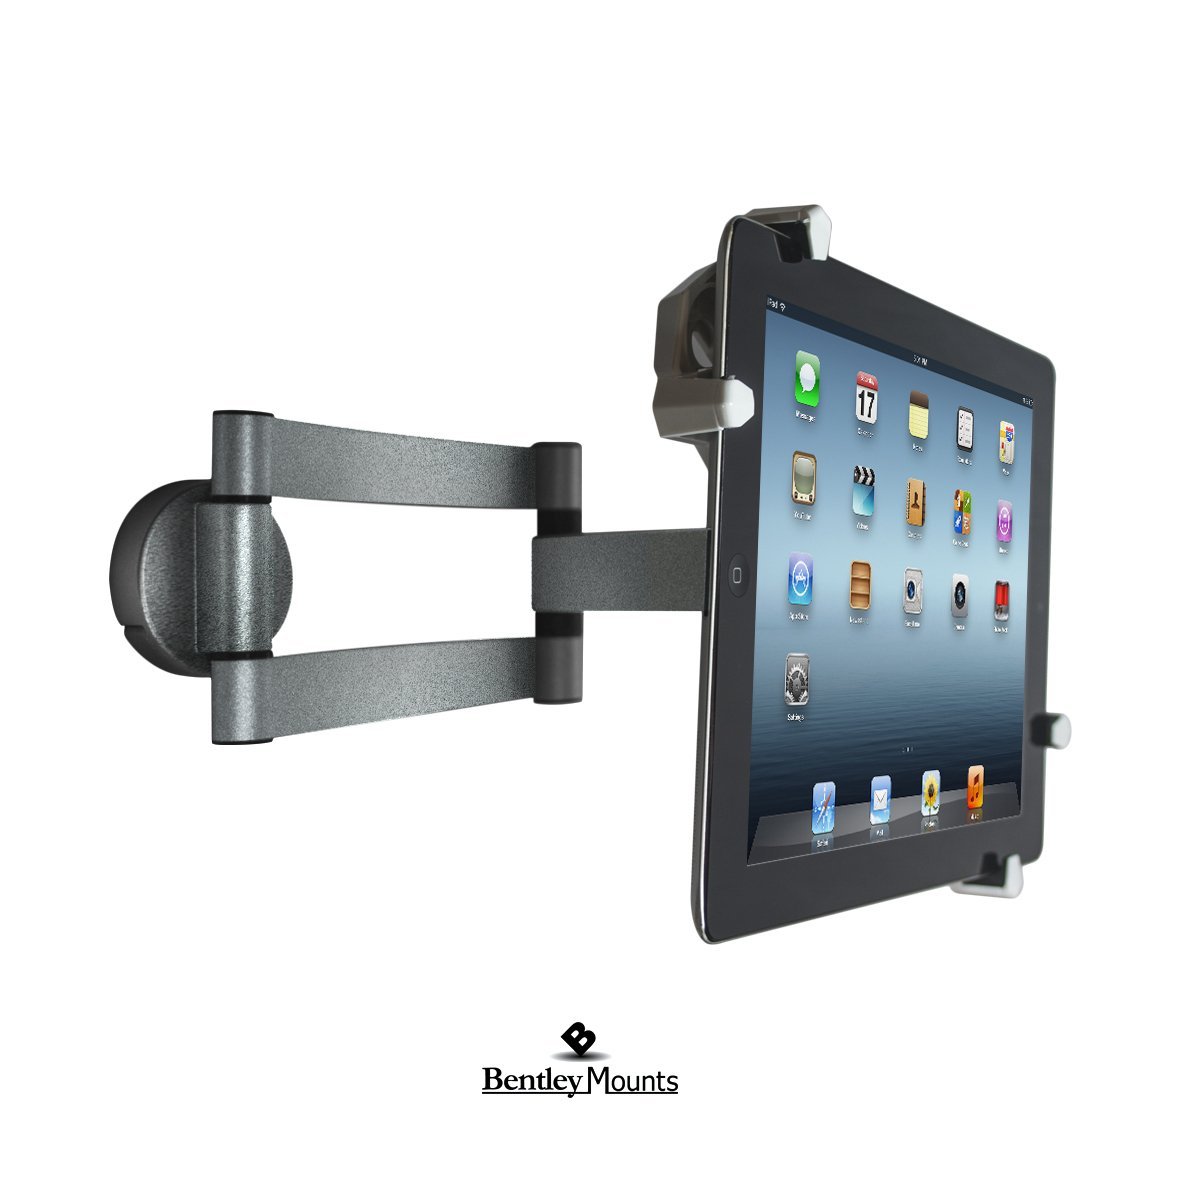 Bentley Mounts Universal Tablet Wall Mount for Hands Free Viewing in Your Home, Office, Store, or Bedroom Wall with a Single Swivel Arm for Maximum Flexibility -Rotation: 360° - Swivel: 180° - Tilt: ±45°